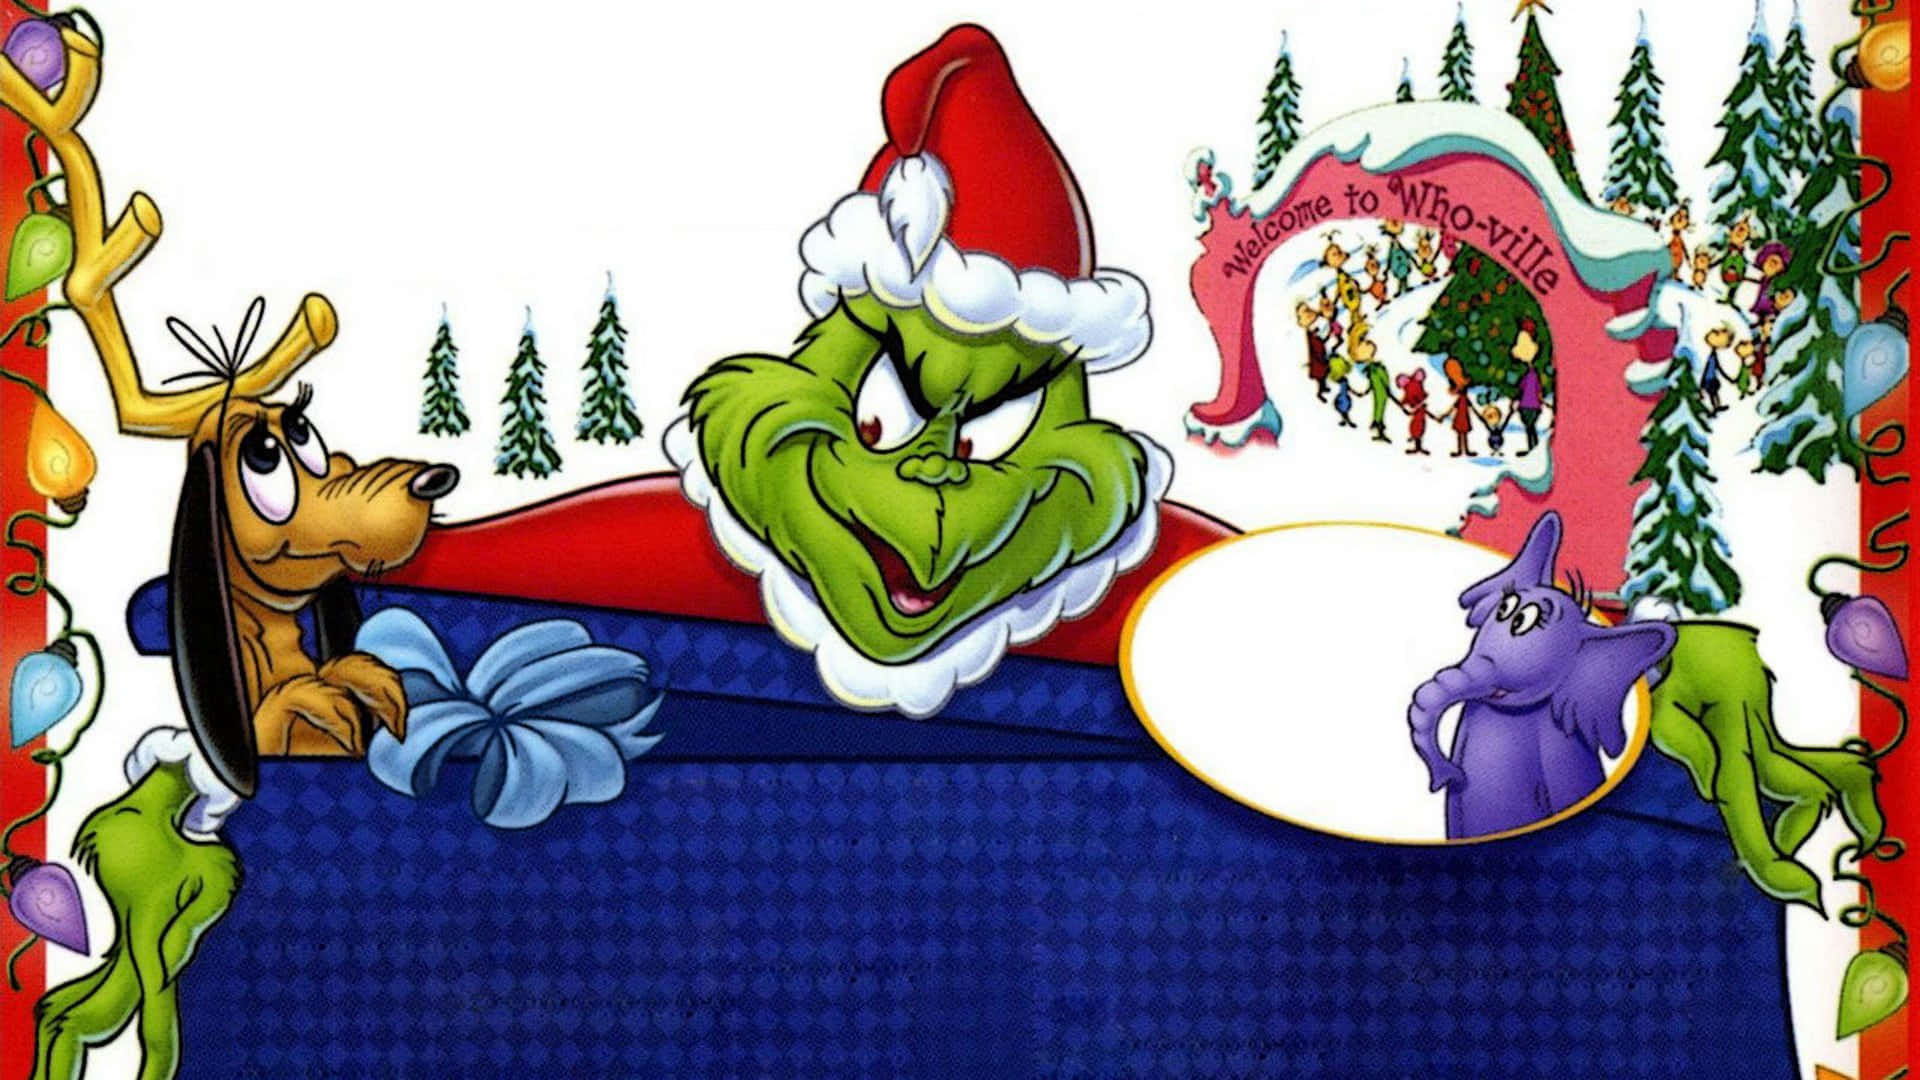 Celebrate the Holidays with Cute Grinch